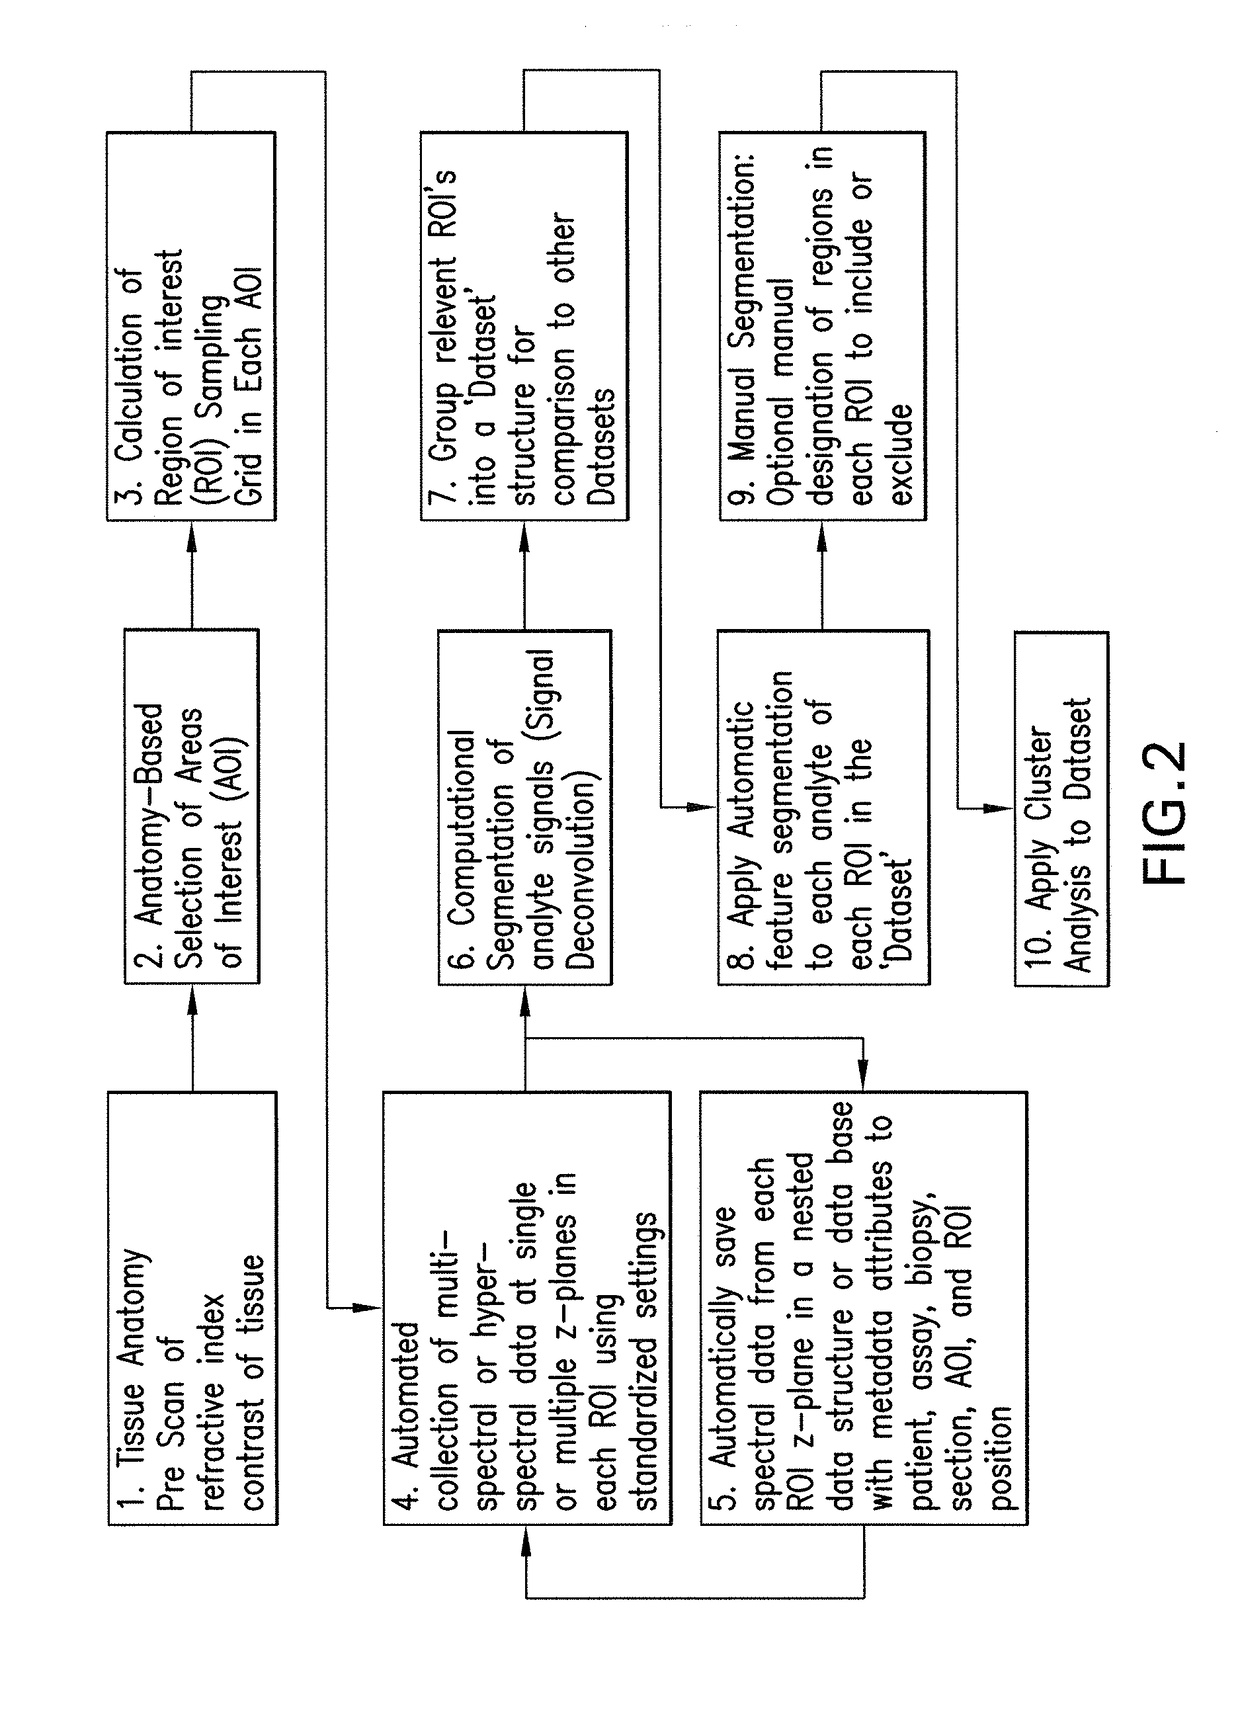 Methods, Systems, and Apparatuses for Quantitative Analysis of Heterogeneous Biomarker Distribution